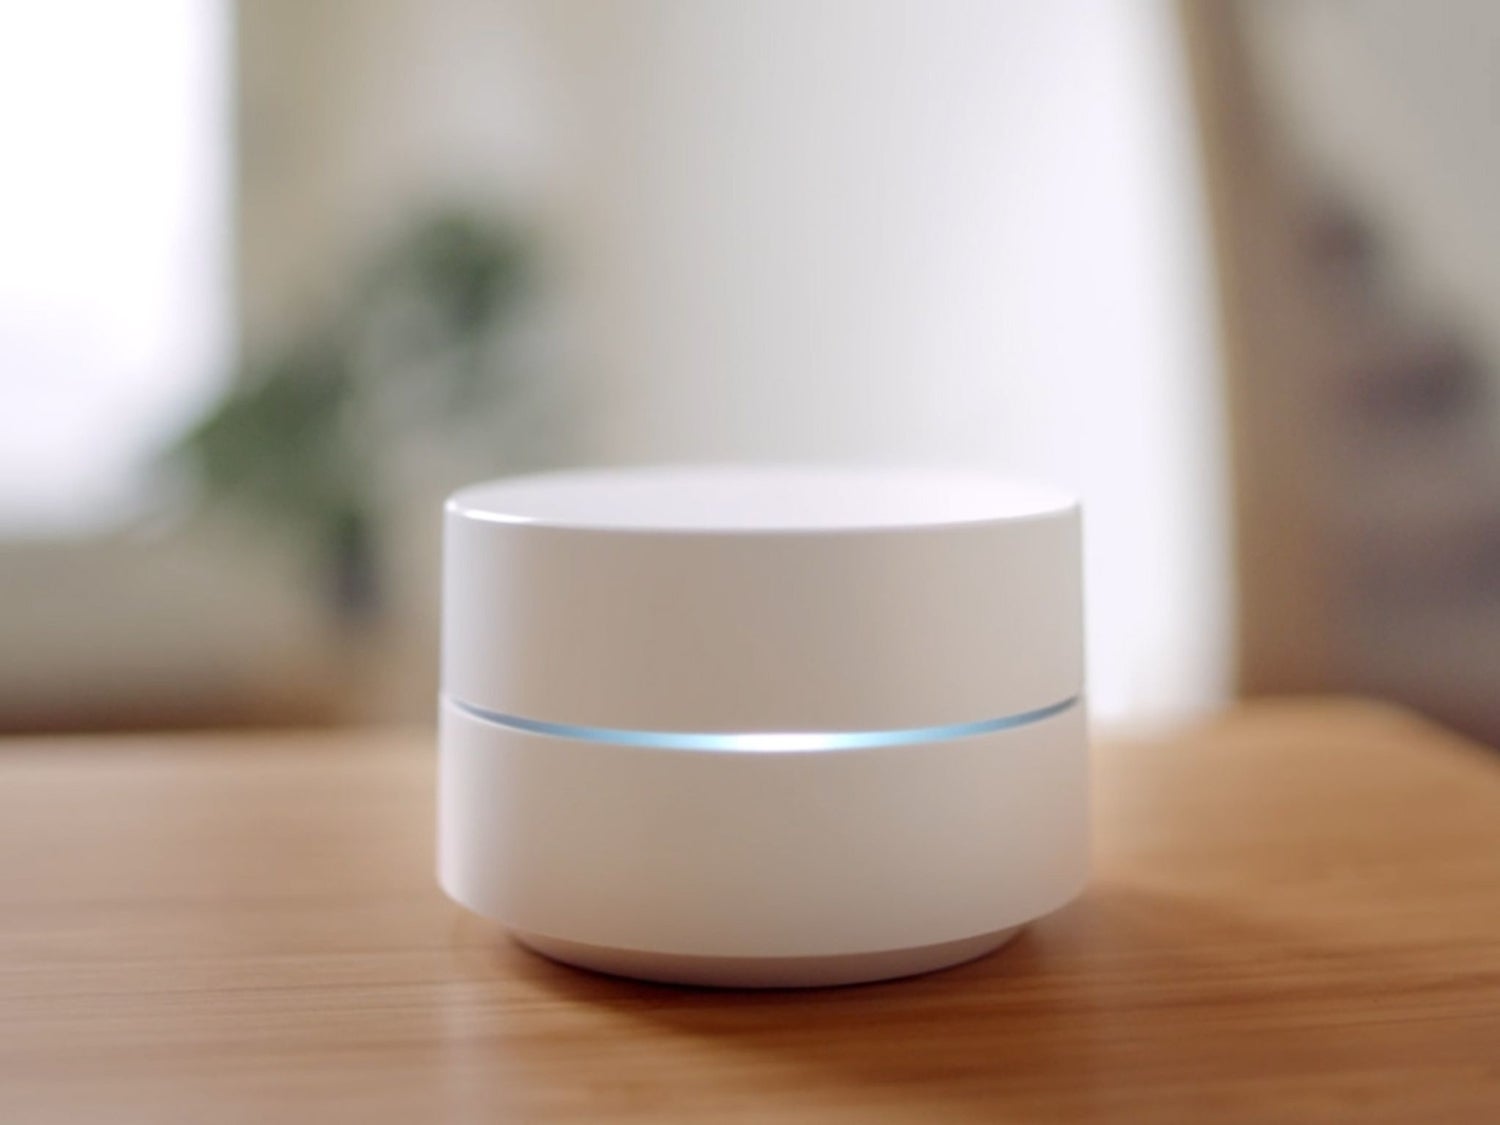 A Google mesh networking device, useful for setting up a mesh network in your home to boost a weak Wi-Fi signal.